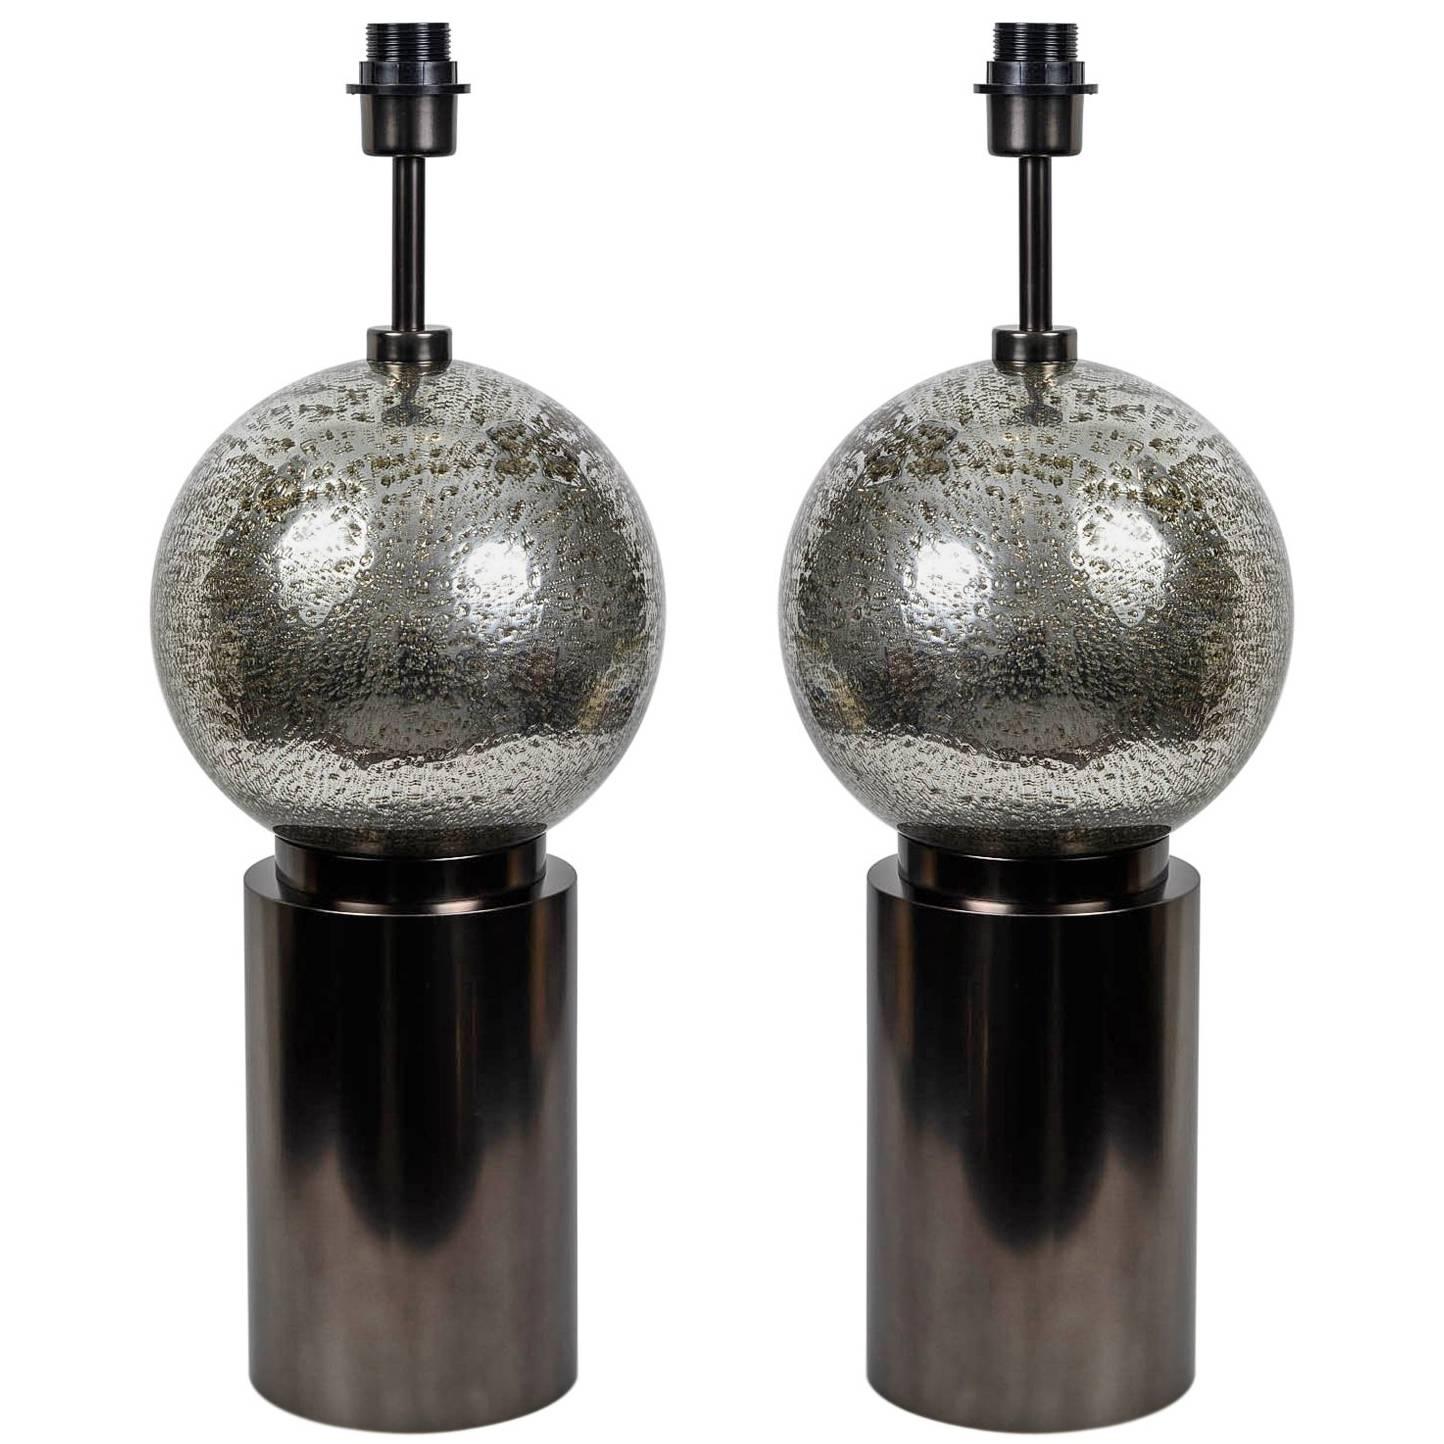  Pair Of Bubbled Glass Table Lamps